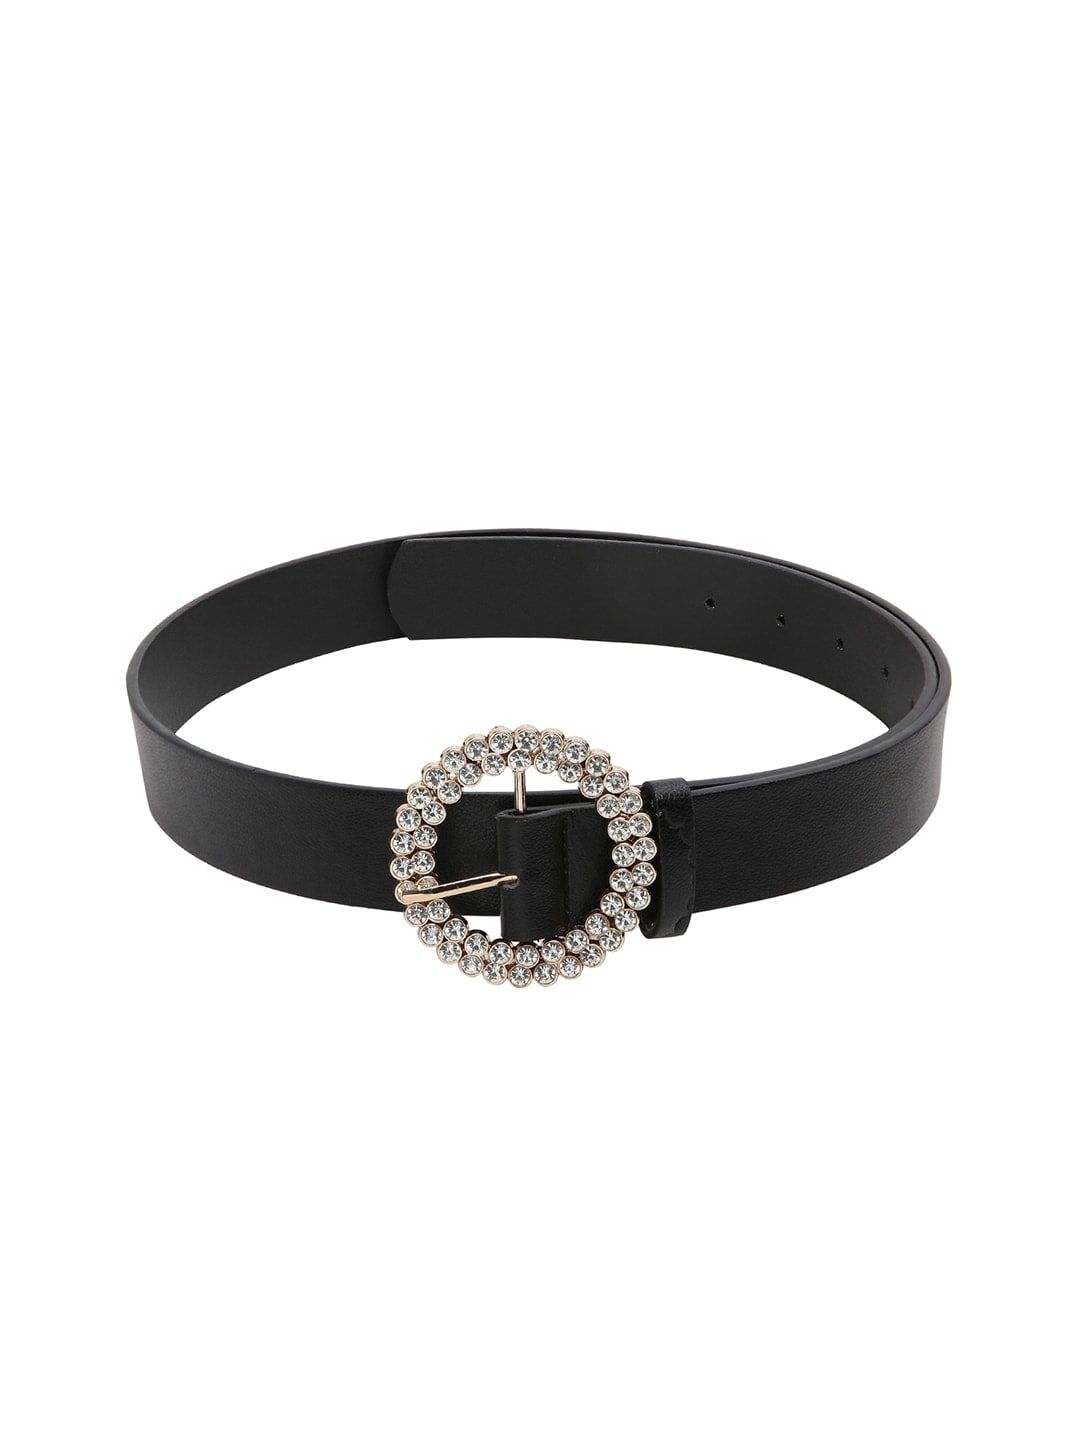 CRUSSET Women Black & Silver-Toned Solid Belt Price in India